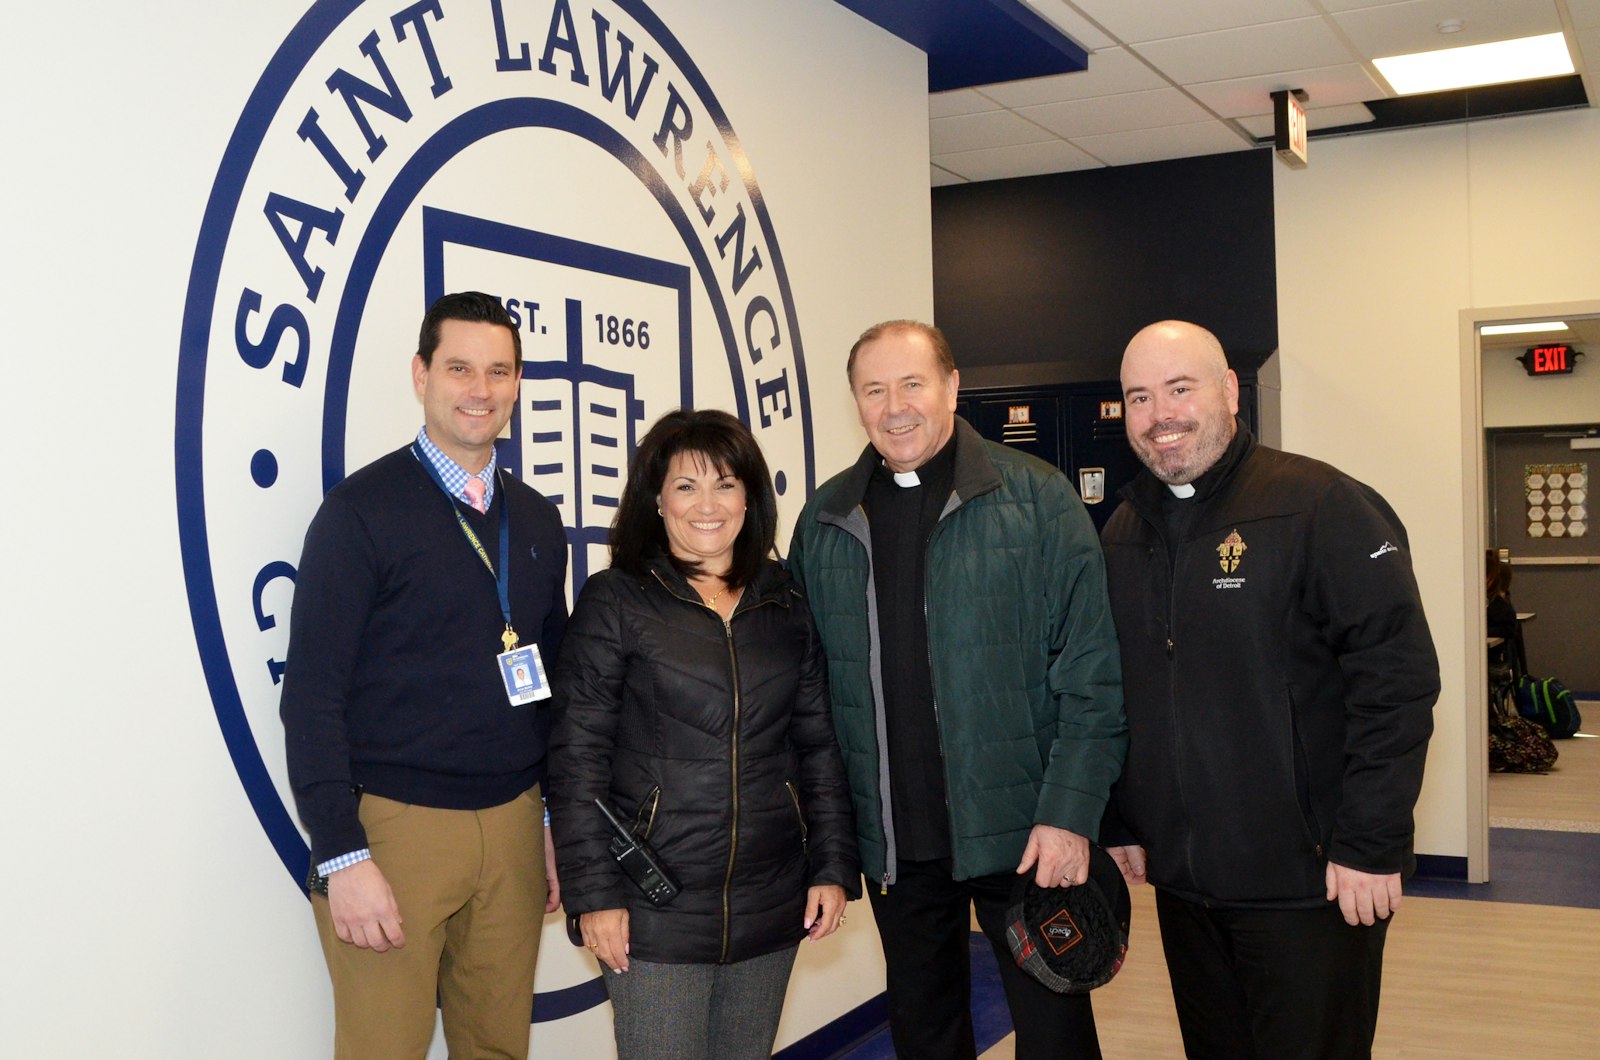 Brian Barker, assistant principal, Lisa DiMercurio, principal, Fr. Roman Pasieczny, pastor, and Fr. Paul Graney, associate pastor, pose in front of the St. Lawrence Elementary School crest on the first day of the new middle school's official opening Feb. 28.